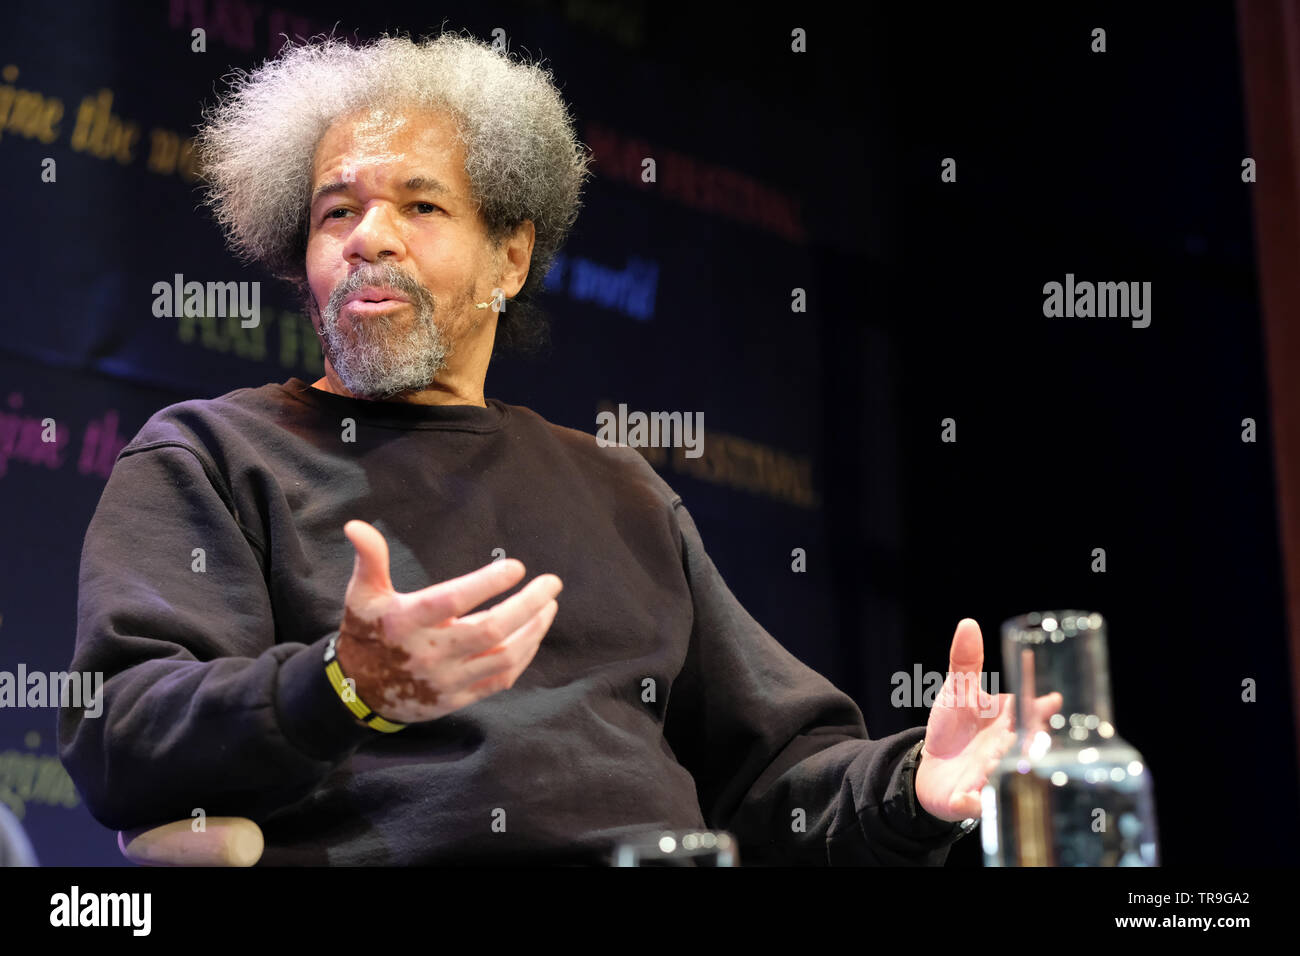 Hay Festival, Hay on Wye, Powys, Wales, UK - Friday 31st May 2019 - Albert Woodfox on stage at the Hay Festival talking about his book Solitary which tells of his many decades in solitary confinement for a crime he did not commit. The eleven day Festival features over 800 events - the Hay Festival continues to Sunday 2nd June. Photo Steven May / Alamy Live News Stock Photo